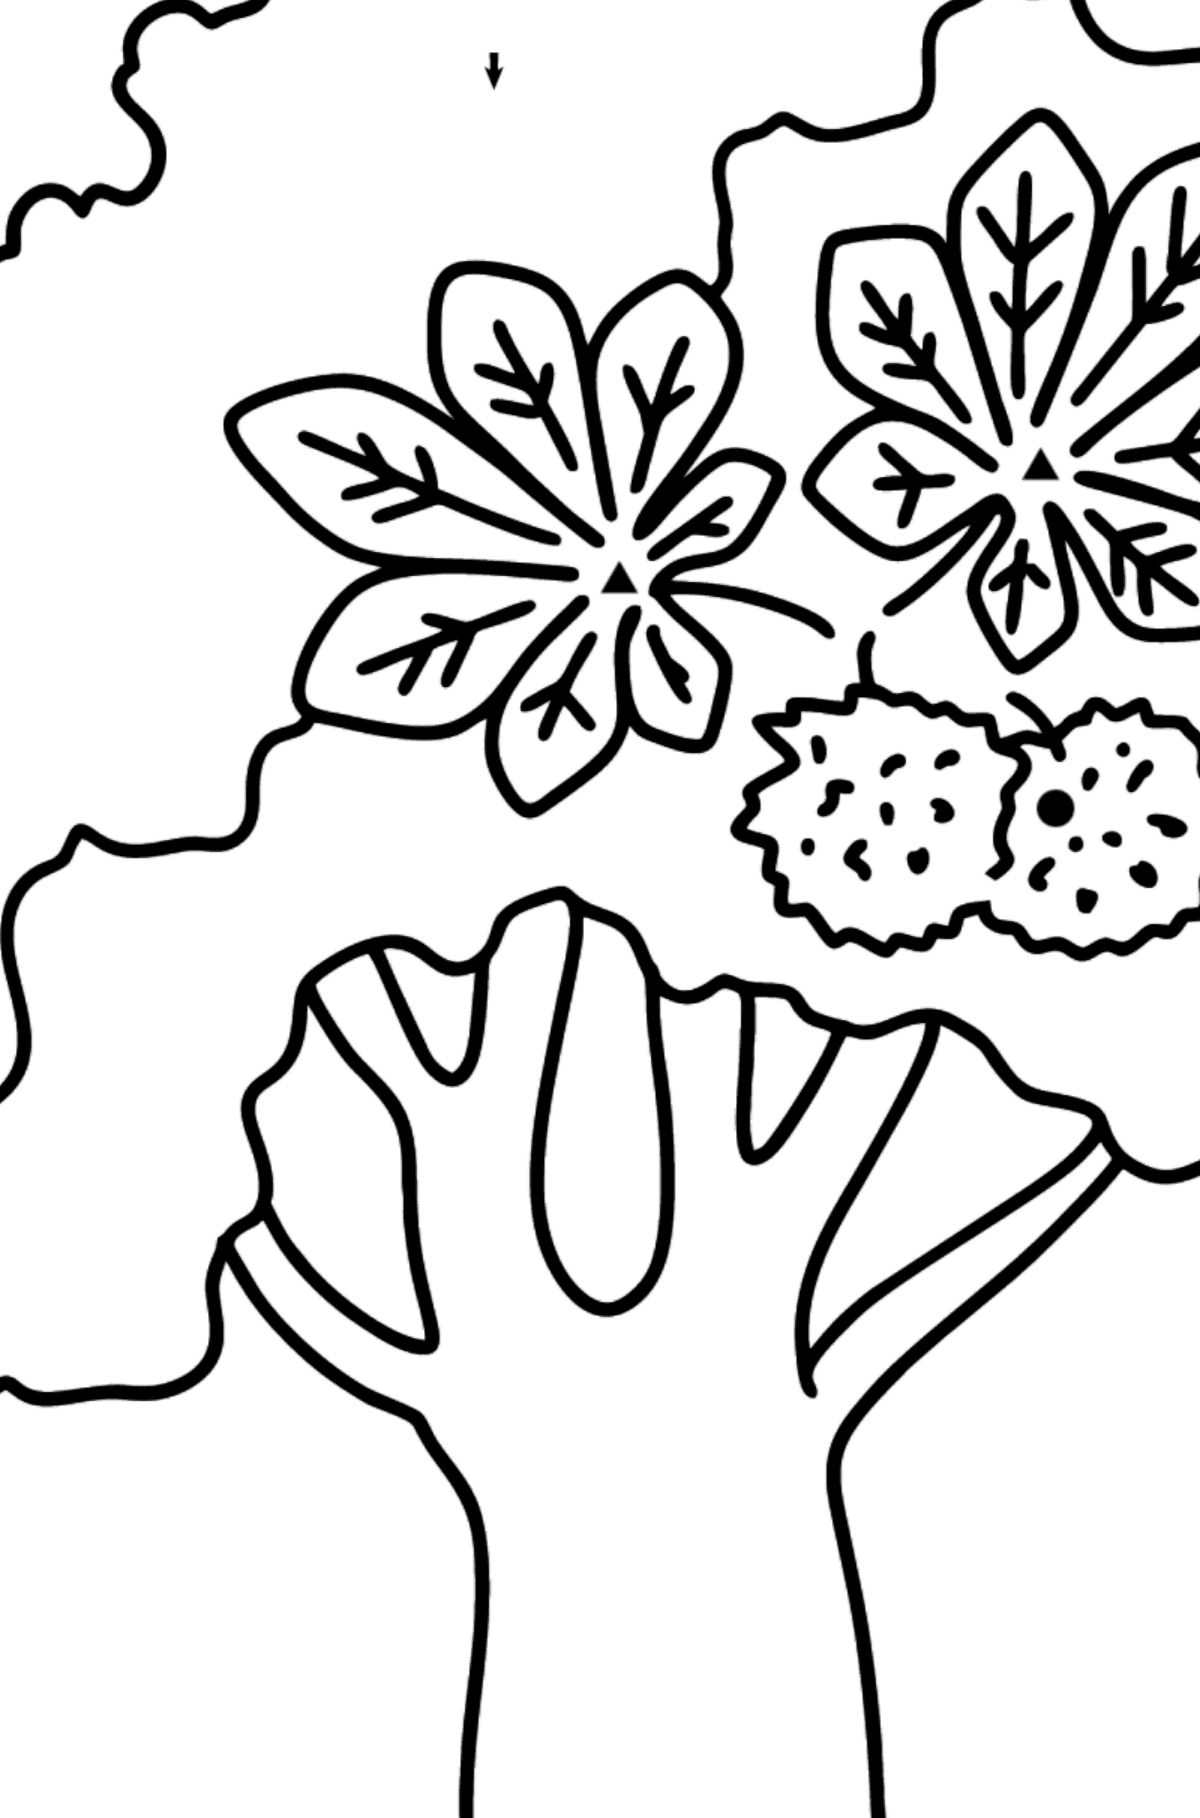 Chestnut coloring page - Coloring by Symbols for Kids